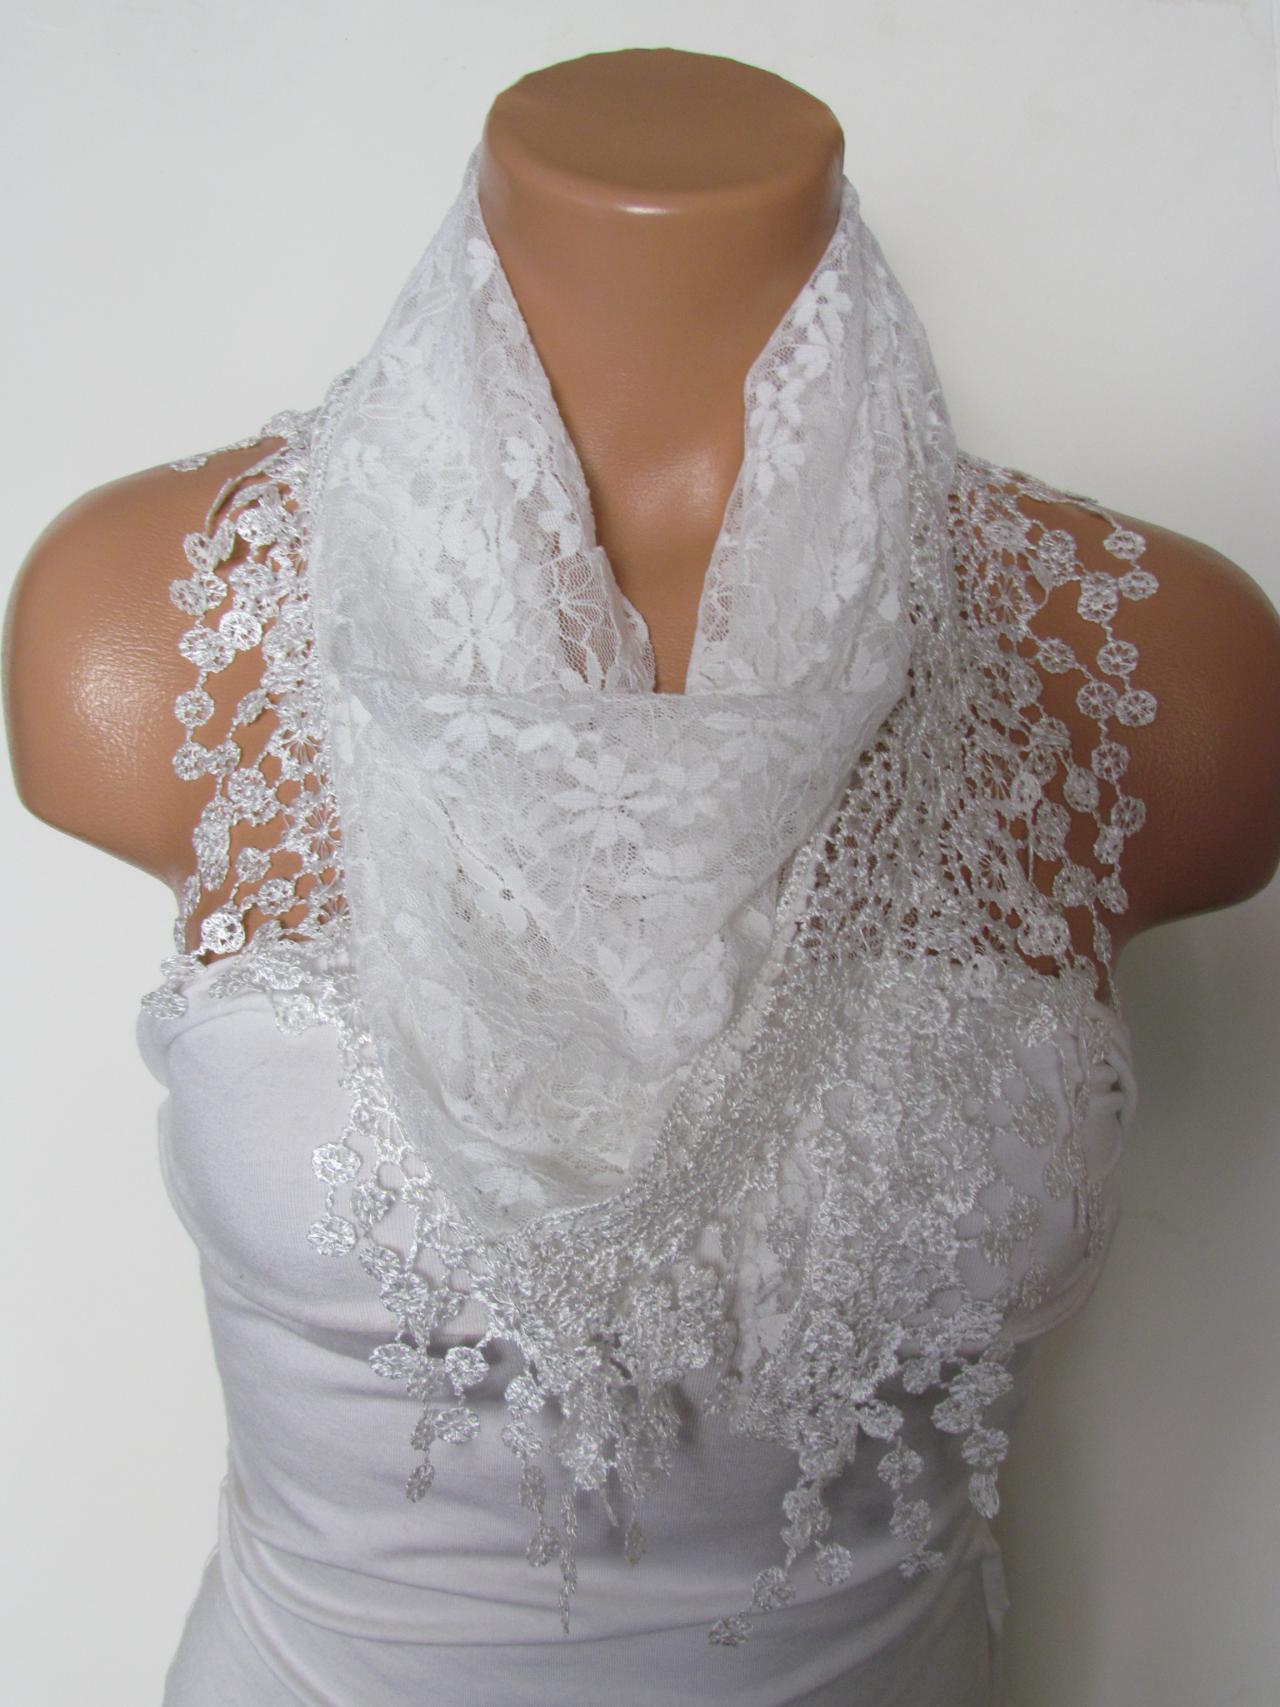 White Long Scarf With Fringe-Winter Fashion Scarf-Headband-Necklace- Infinity Scarf- Winter Accessory-Long Scarf